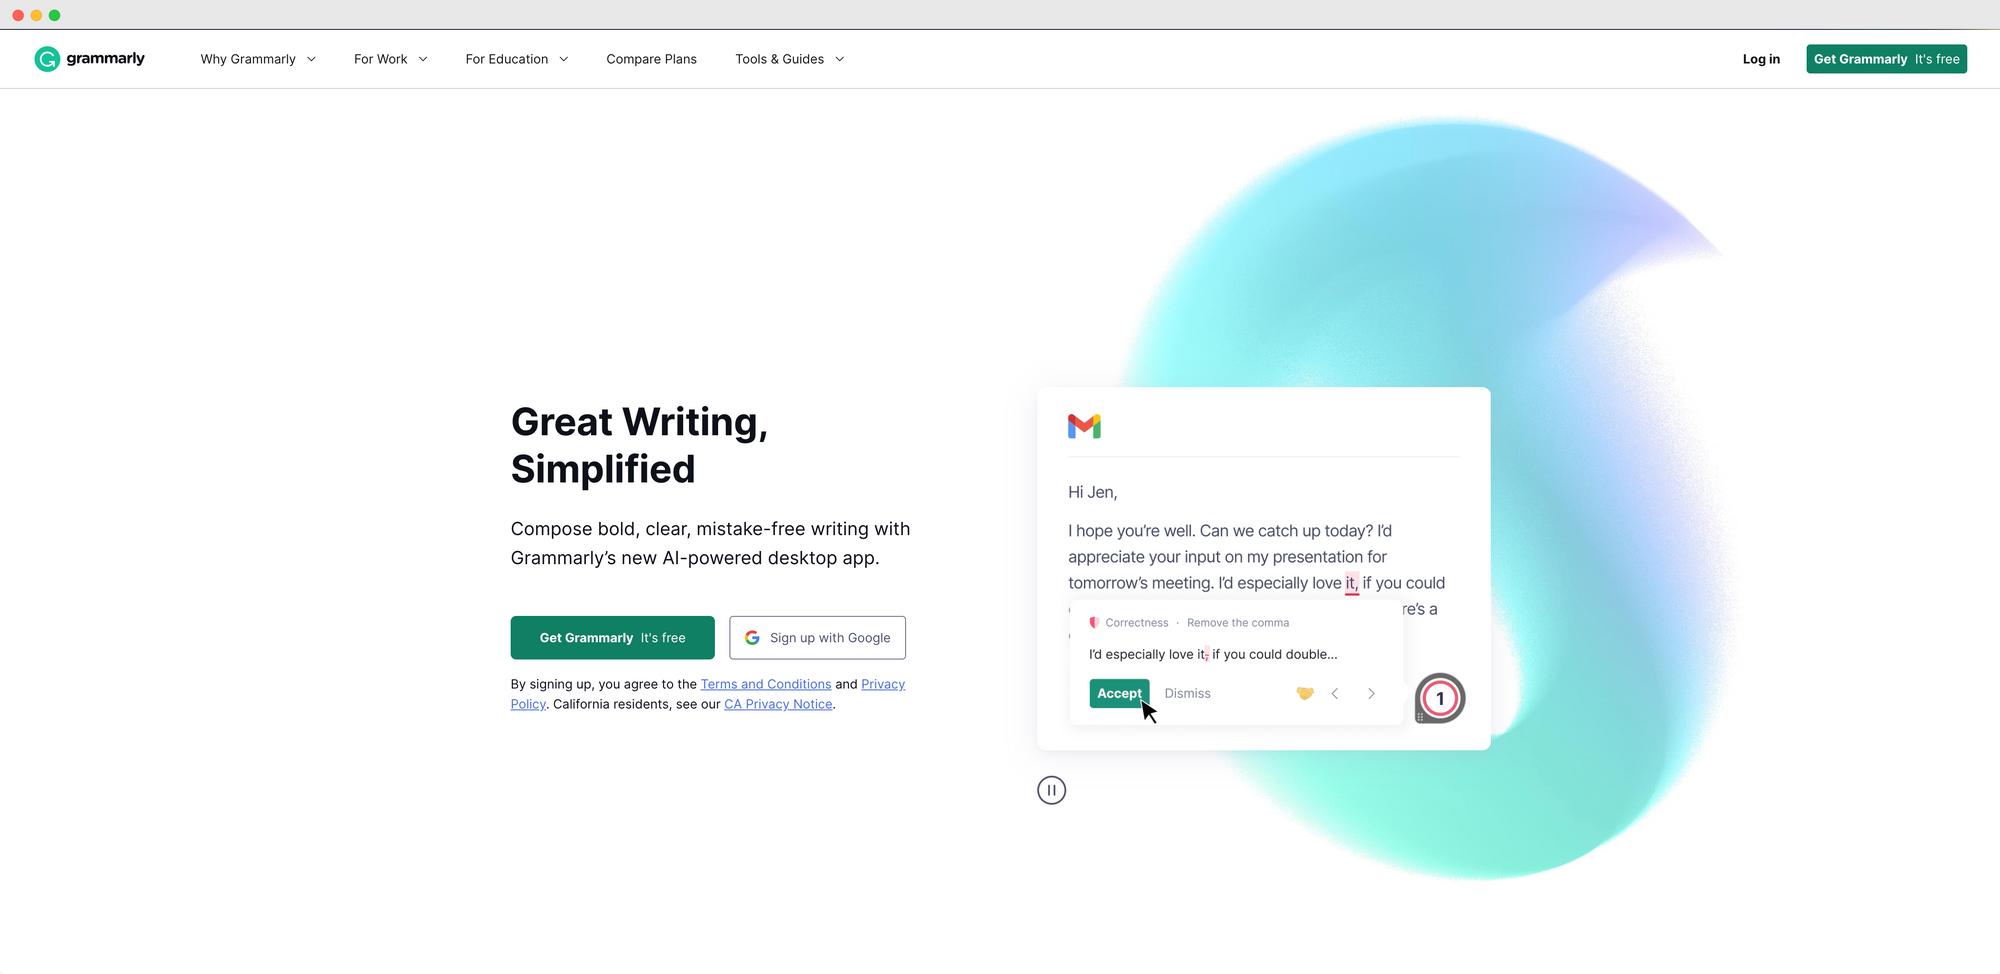 Grammarly homepage showcasing text editing features with AI suggestions